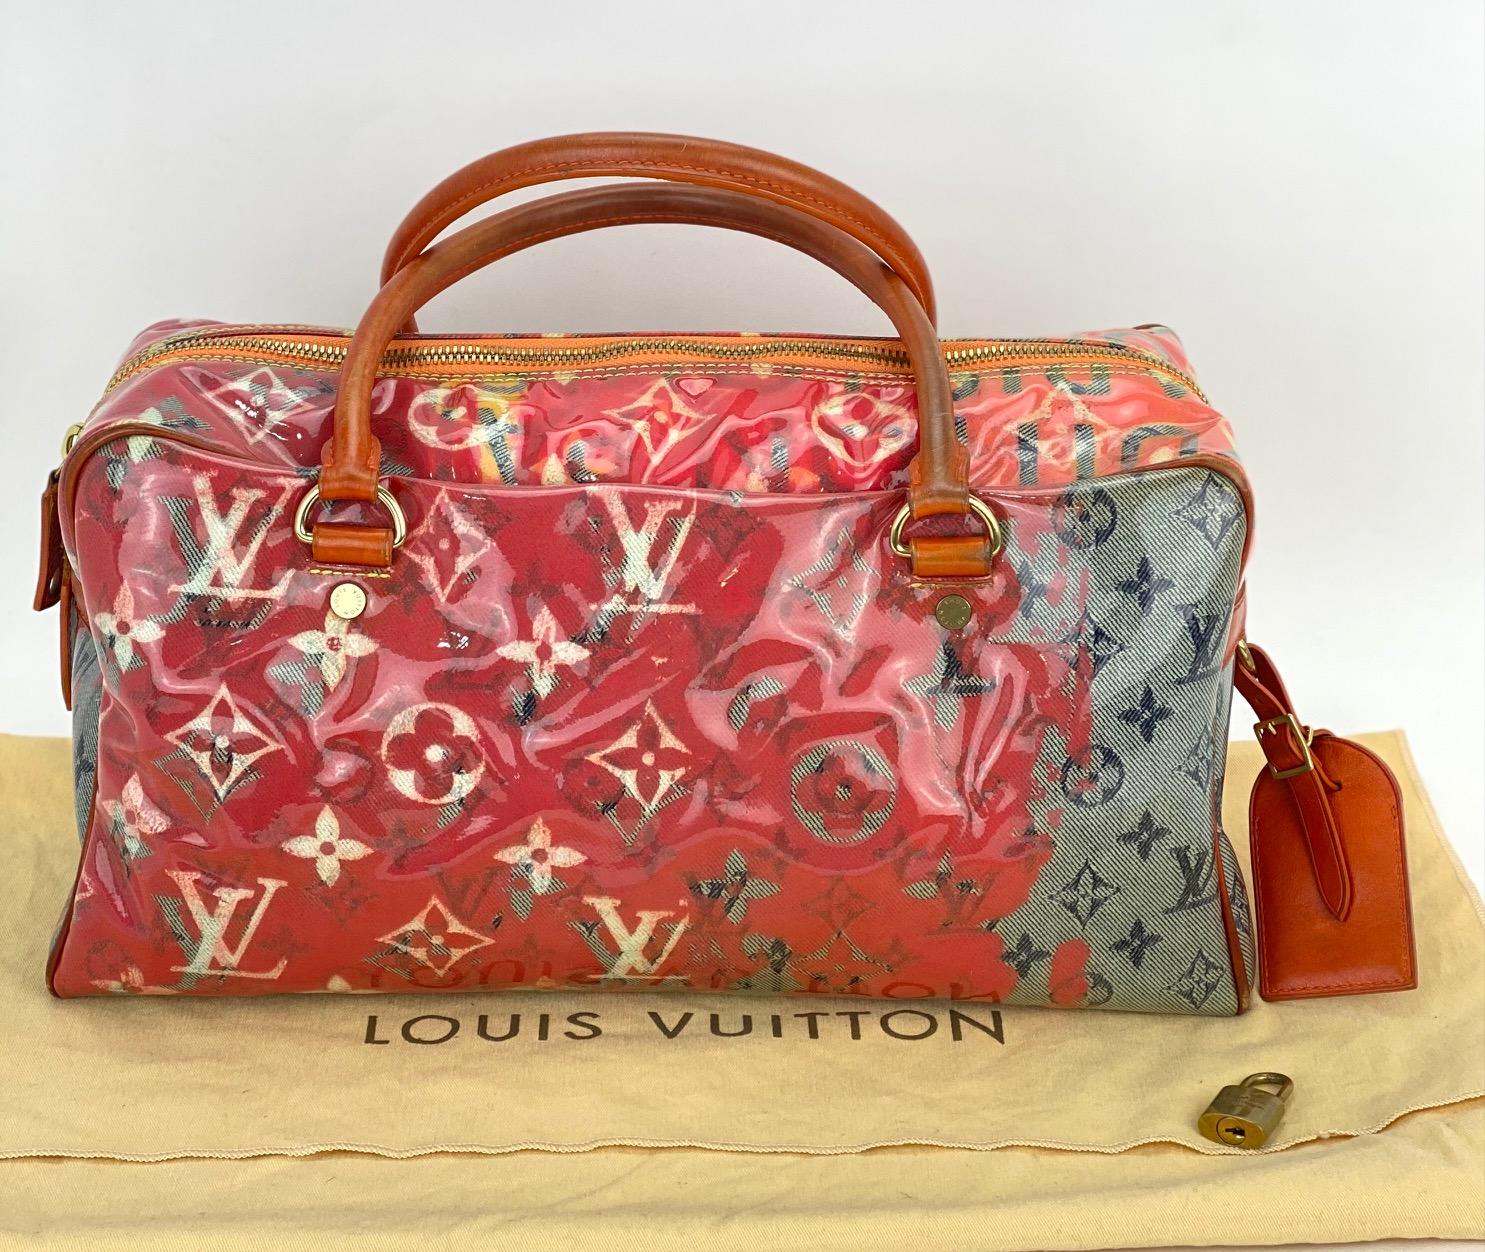 Pre-Owned  100% Authentic
  Louis Vuitton Richard Prince Pink Denim Defile
Weekender PM Pulp Bag
 RATING: B/C..Good shows some signs of use
MATERIAL: Monogram Denim coated canvas with leather trim
HANDLE: double leather, has darkness on bottom
where